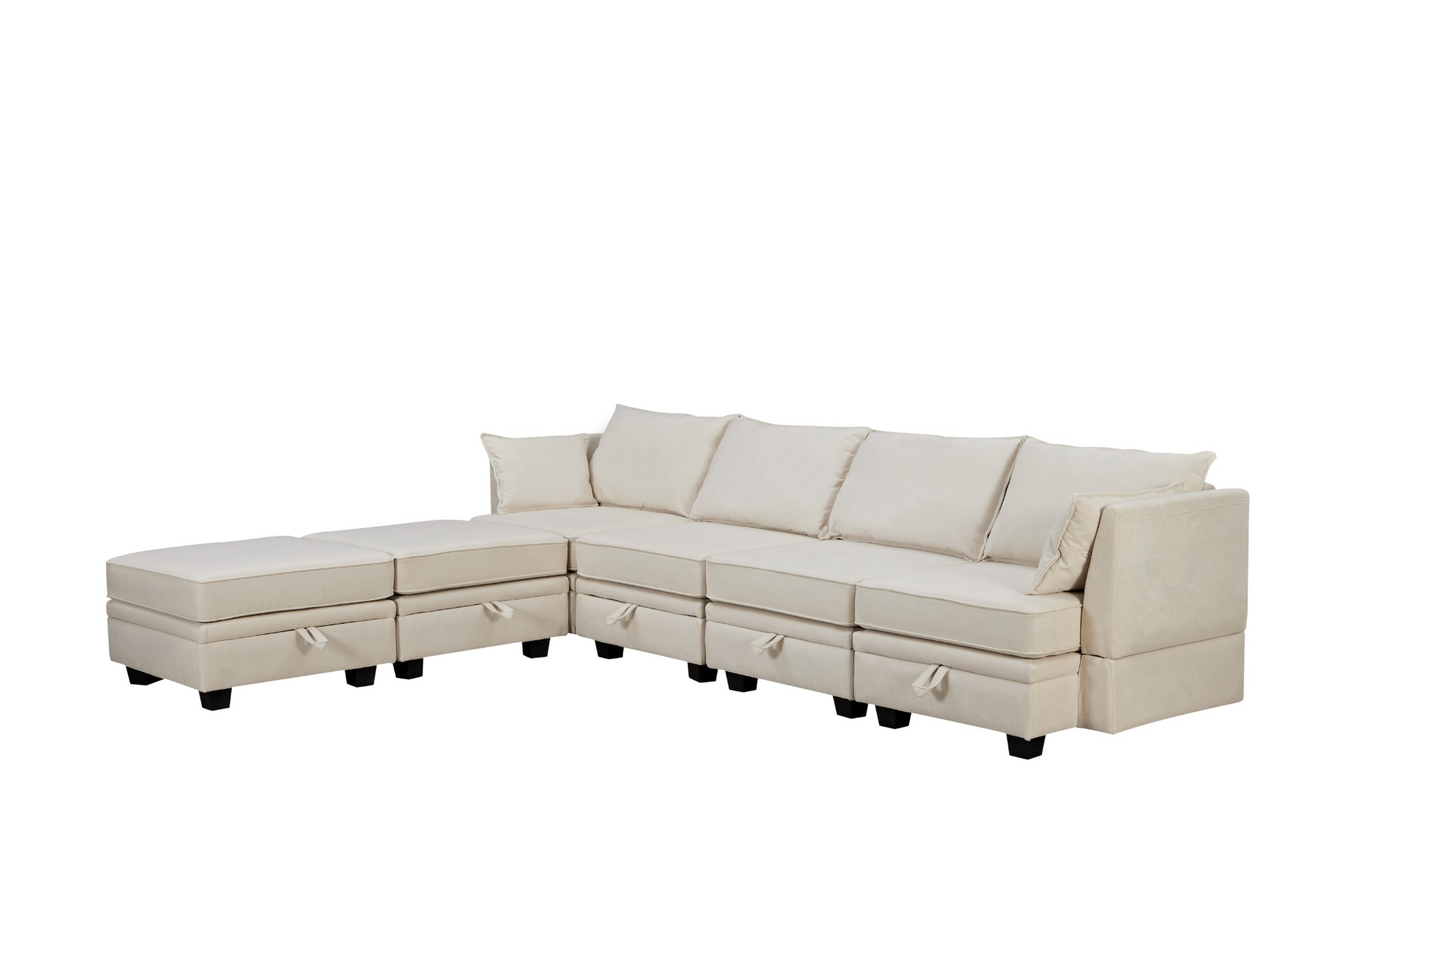 Modern Large U-Shape Modular Sectional Sofa,  Convertible Sofa Bed with Reversible Chaise for Living Room, Storage Seat